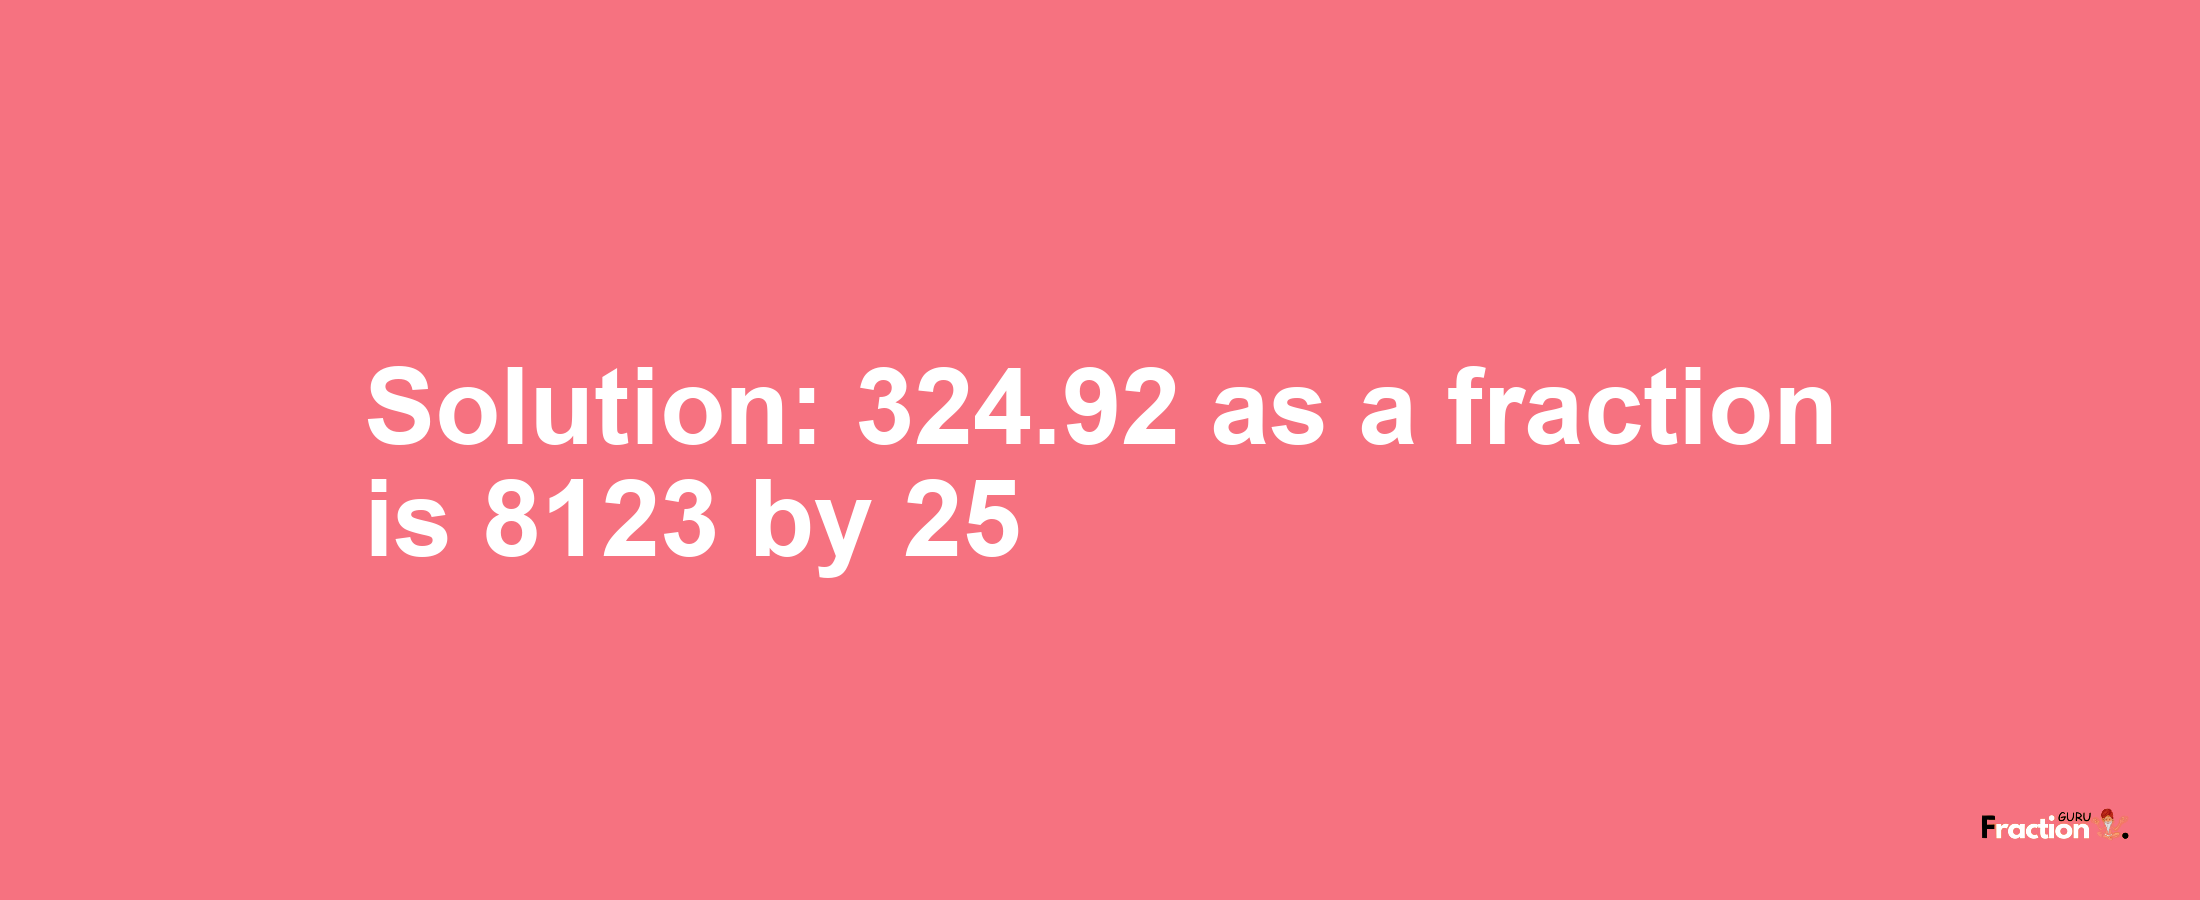 Solution:324.92 as a fraction is 8123/25